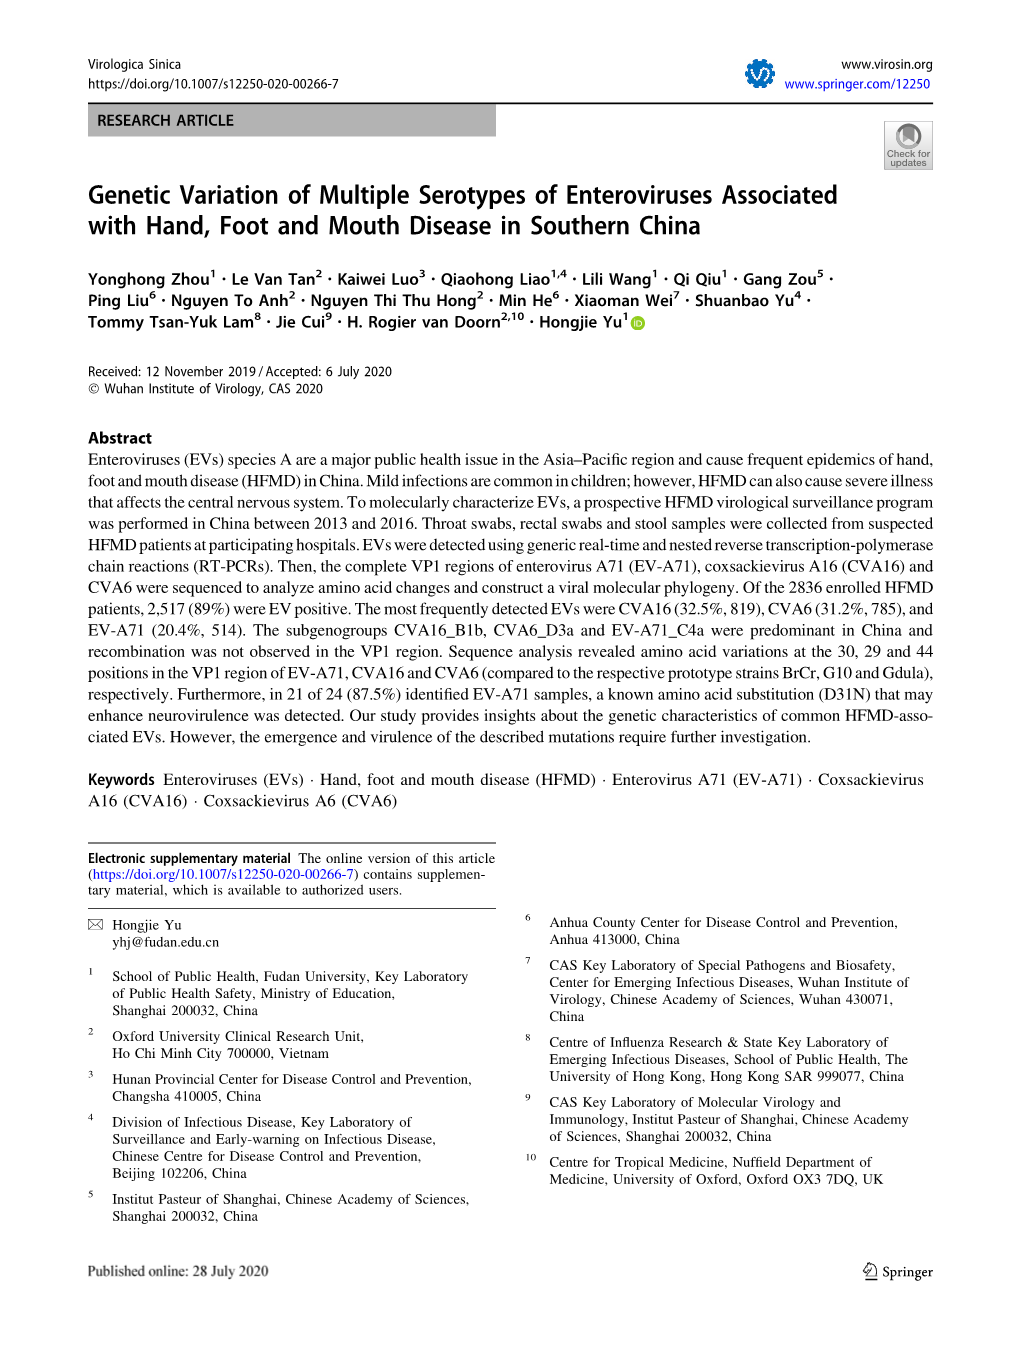 Genetic Variation of Multiple Serotypes of Enteroviruses Associated with Hand, Foot and Mouth Disease in Southern China